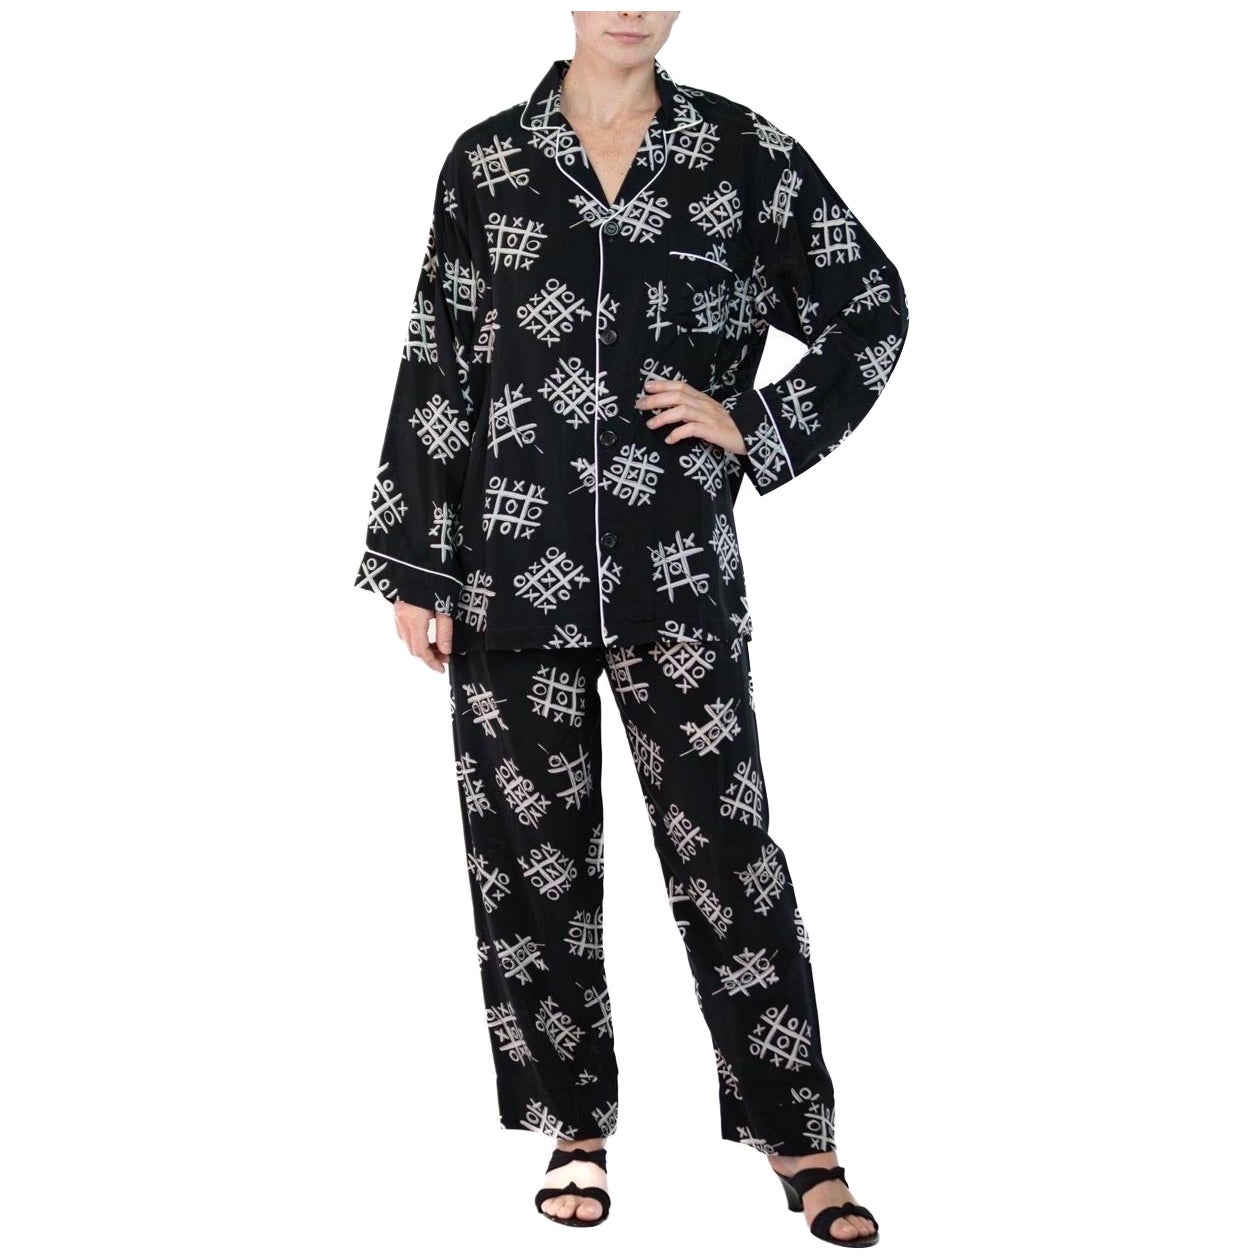 Morphew Collection Black & White Tic Tac Toe Novelty Print Cold Rayon Bias Paja For Sale